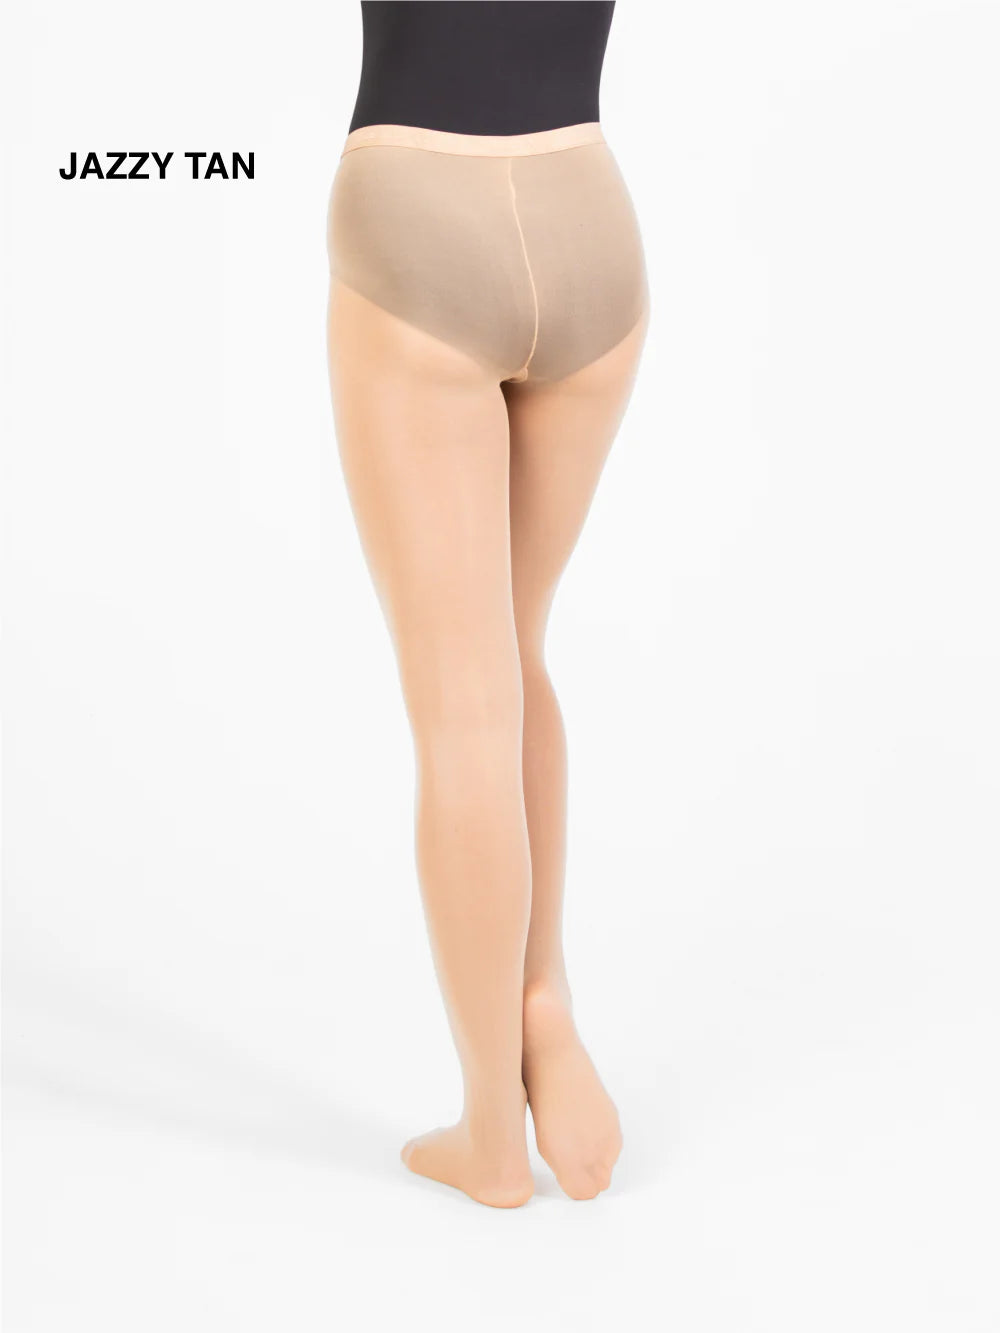 Body Wrappers Footed Tights in Jazzy Tan